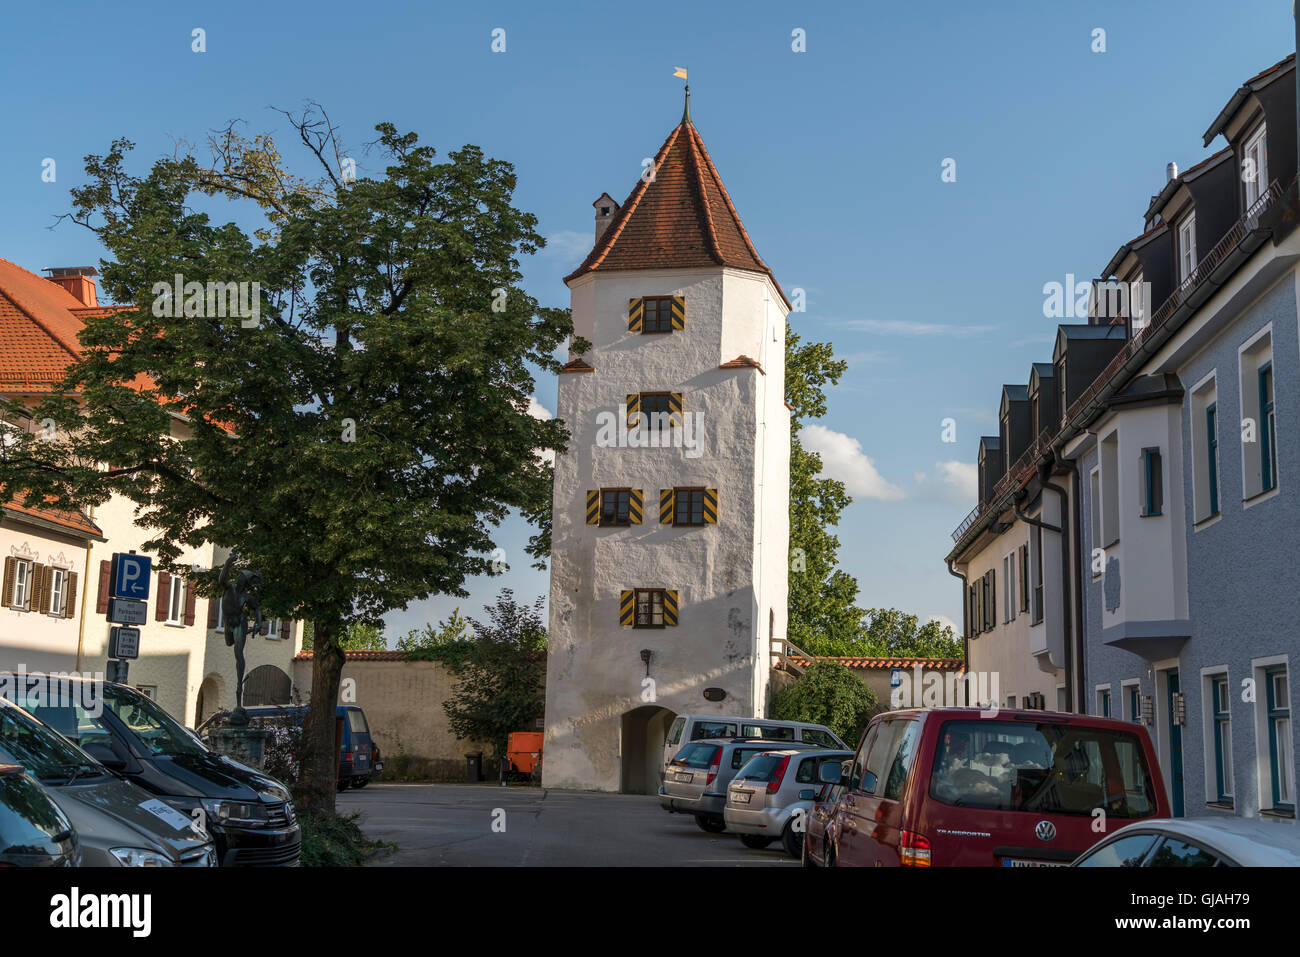 police watch tower, gate tower in the historic old town of Schongau,  Upper-Bavaria, Bavaria, Germany, Europe Stock Photo